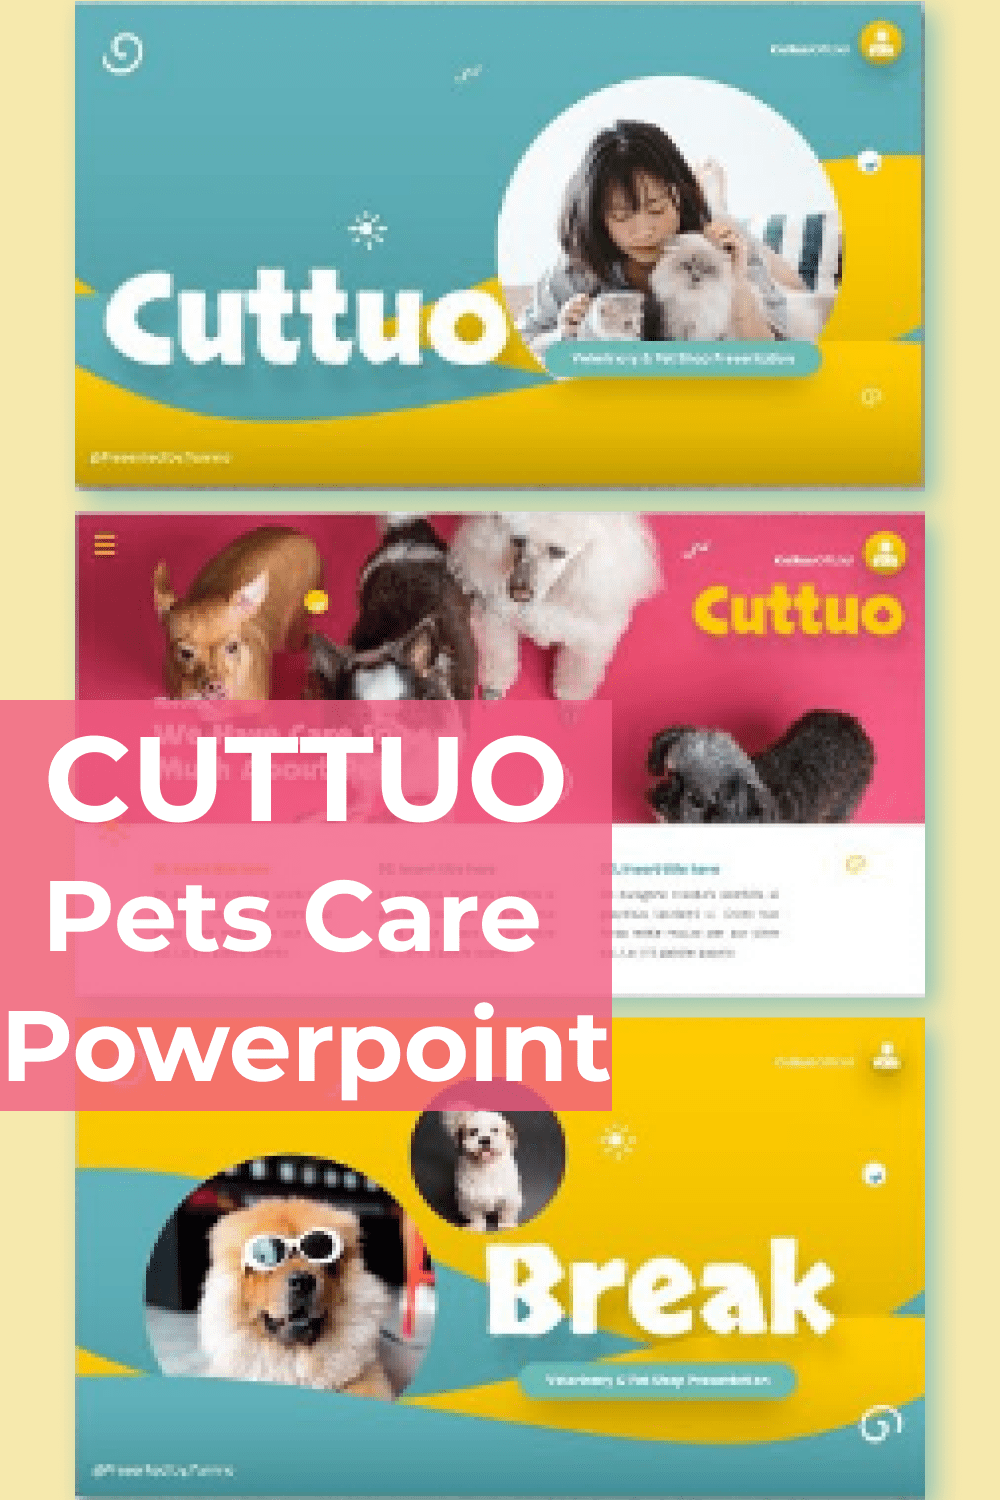 Cuttuo - Pets Care Powerpoint Pinterest.